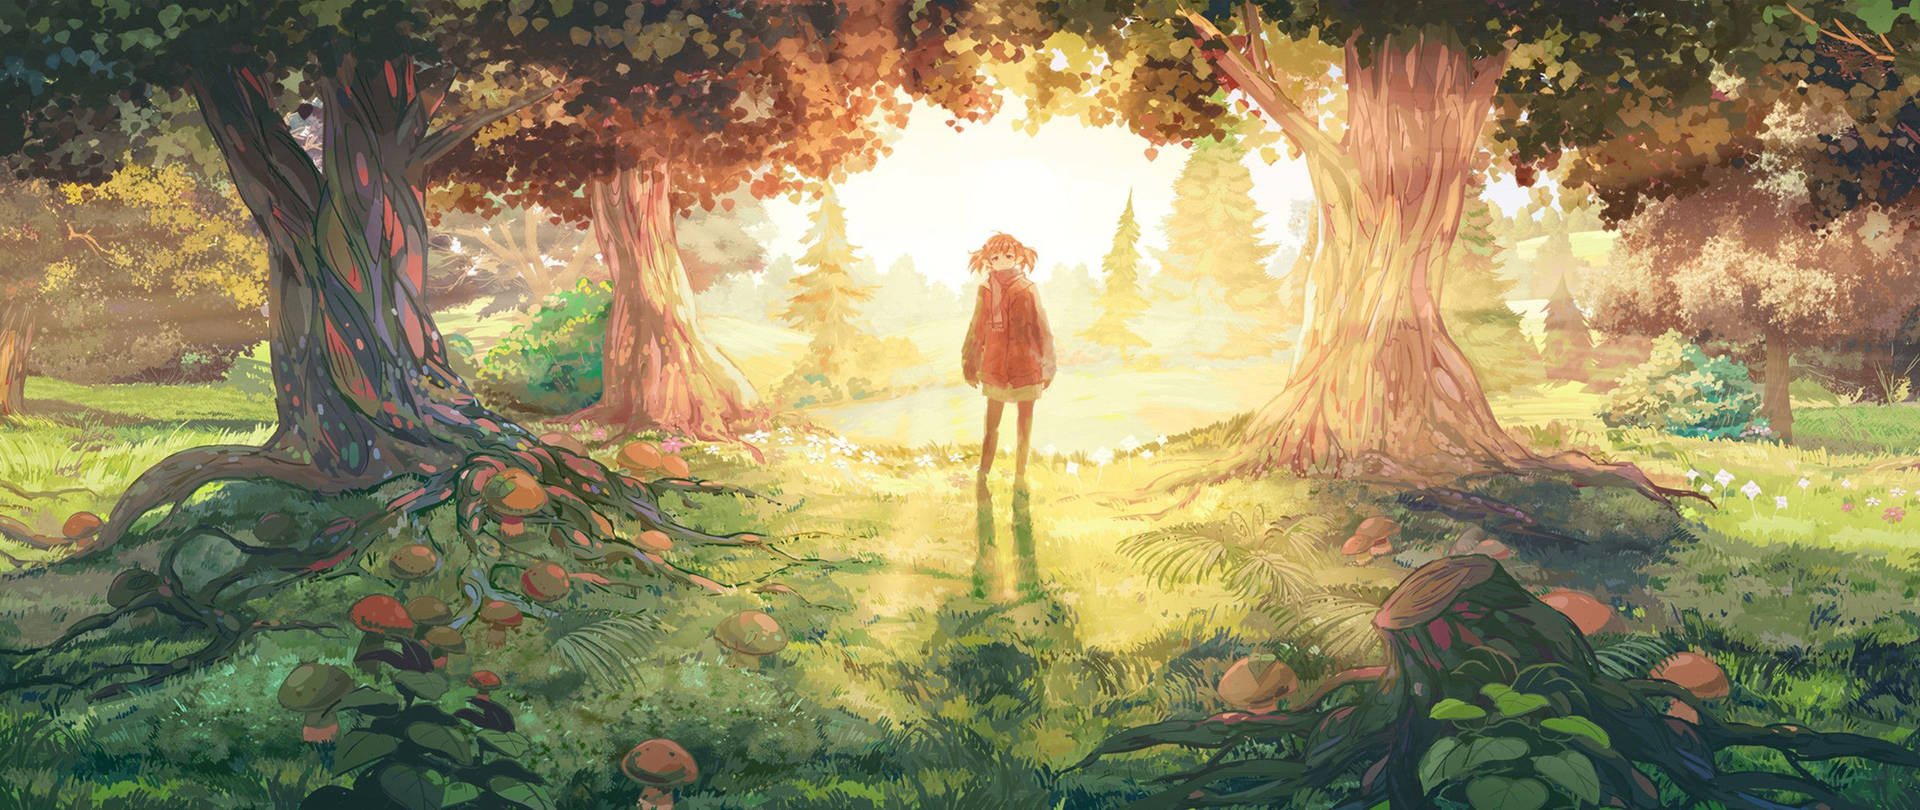 Anime Girl In A Forest wallpaper.